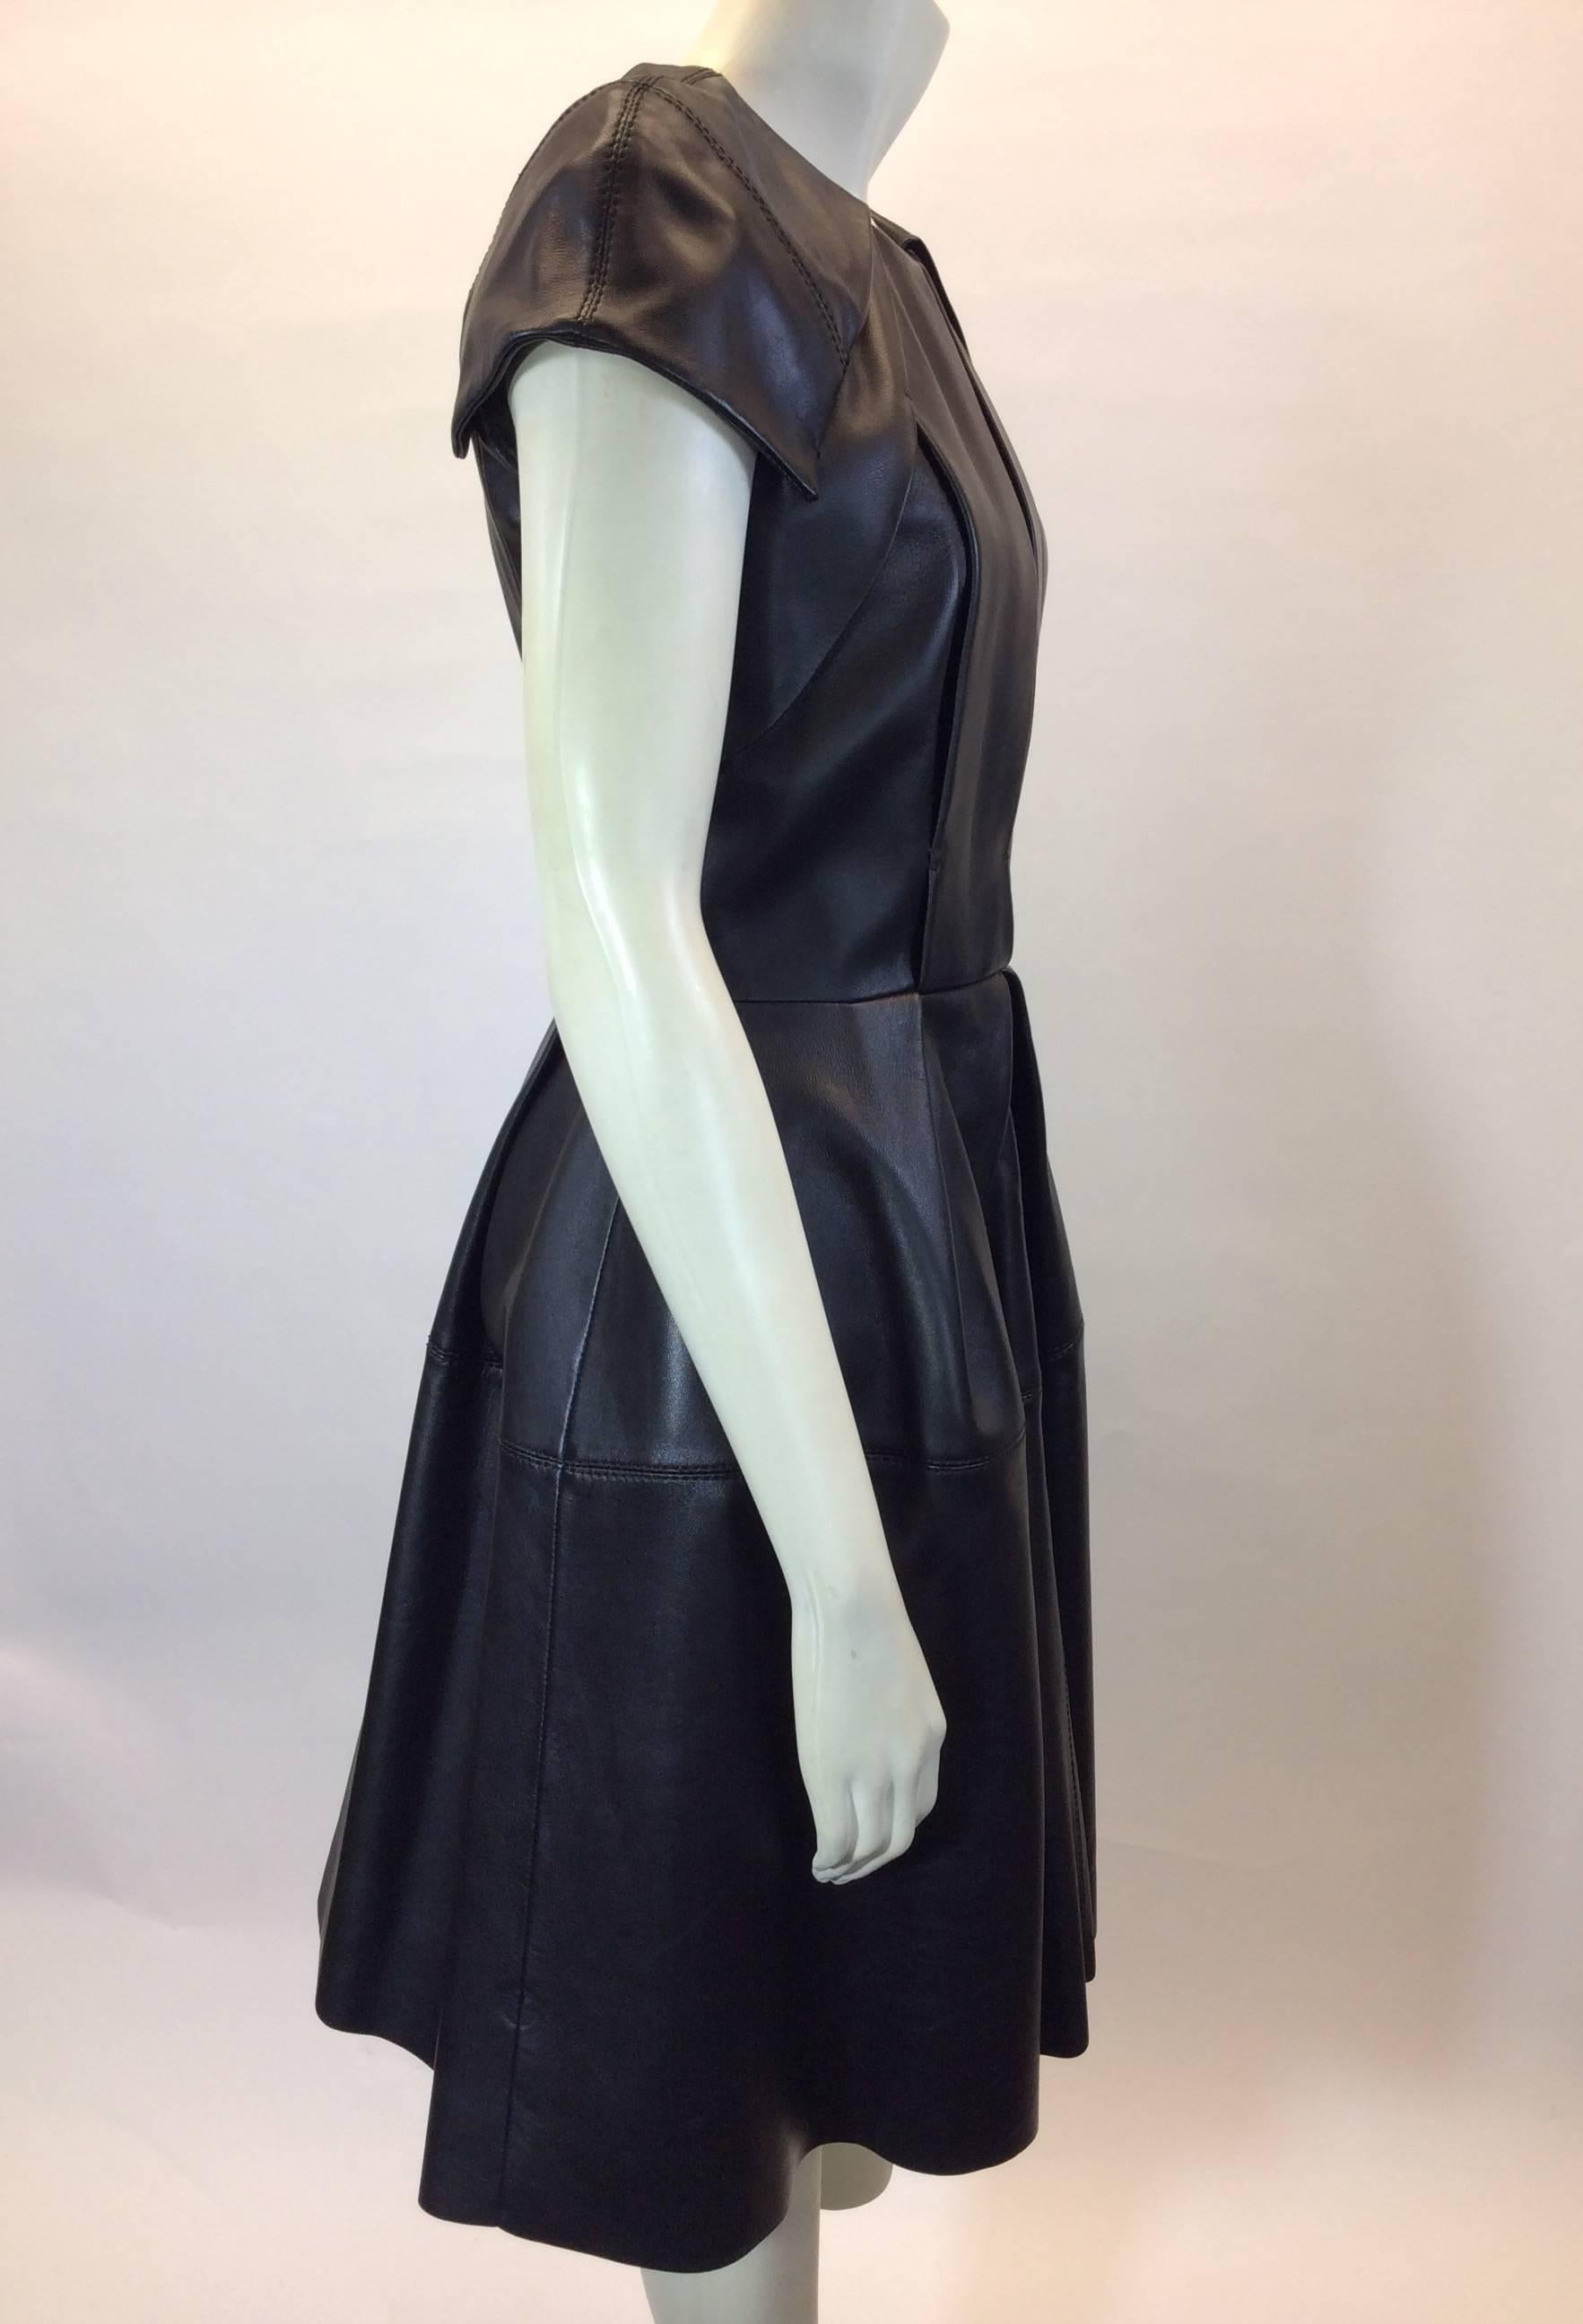 Dice Kayek Black Leather  Structured Dress  In New Condition For Sale In Narberth, PA